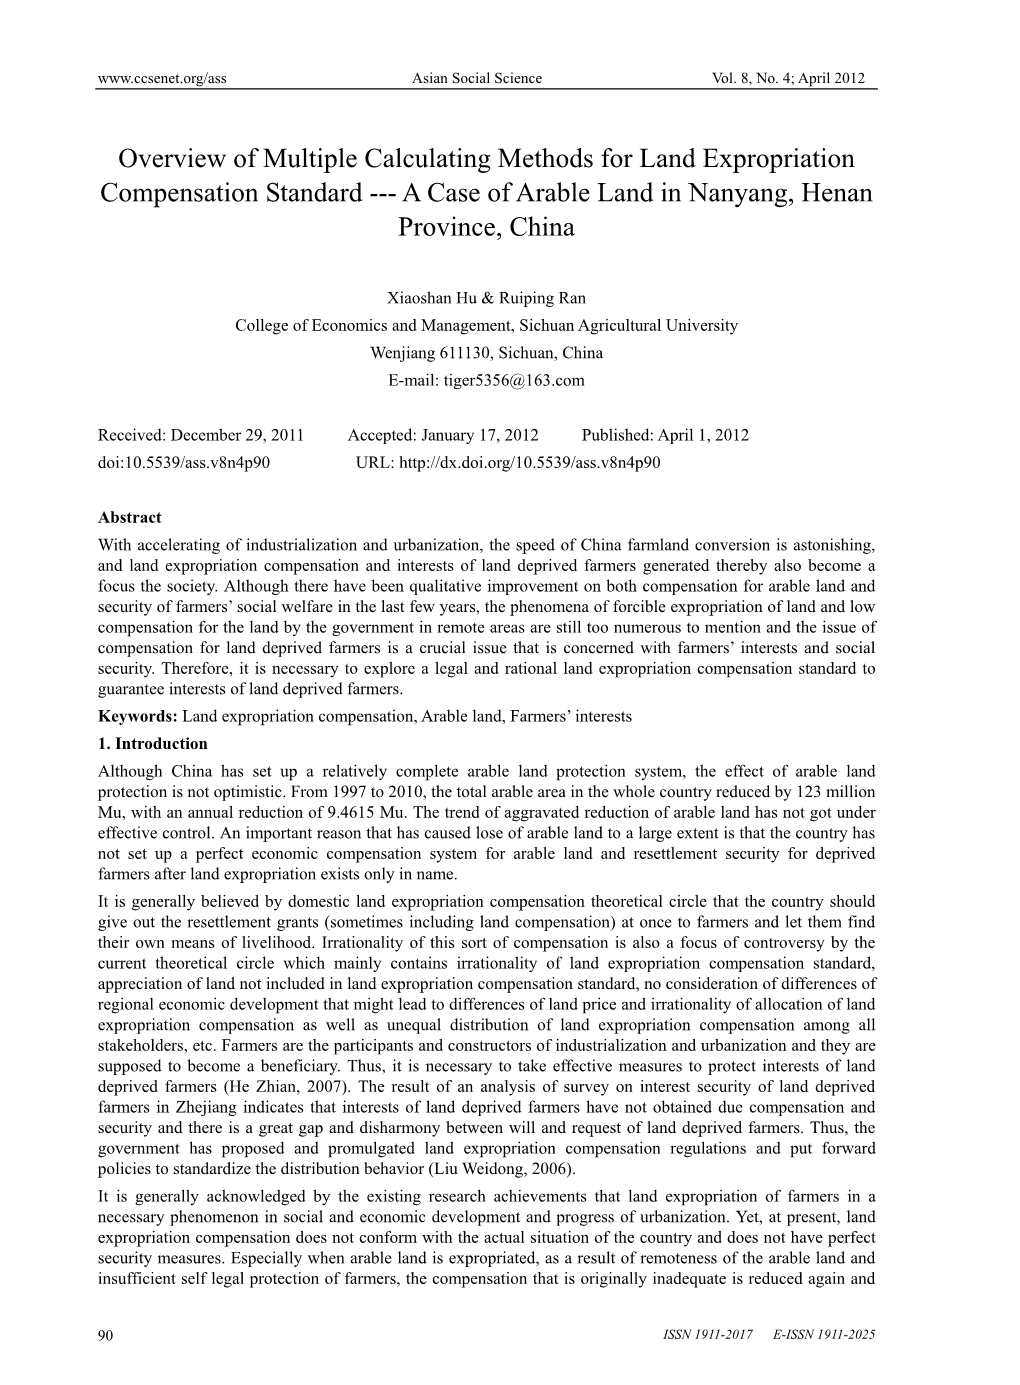 Overview of Multiple Calculating Methods for Land Expropriation Compensation Standard --- a Case of Arable Land in Nanyang, Henan Province, China